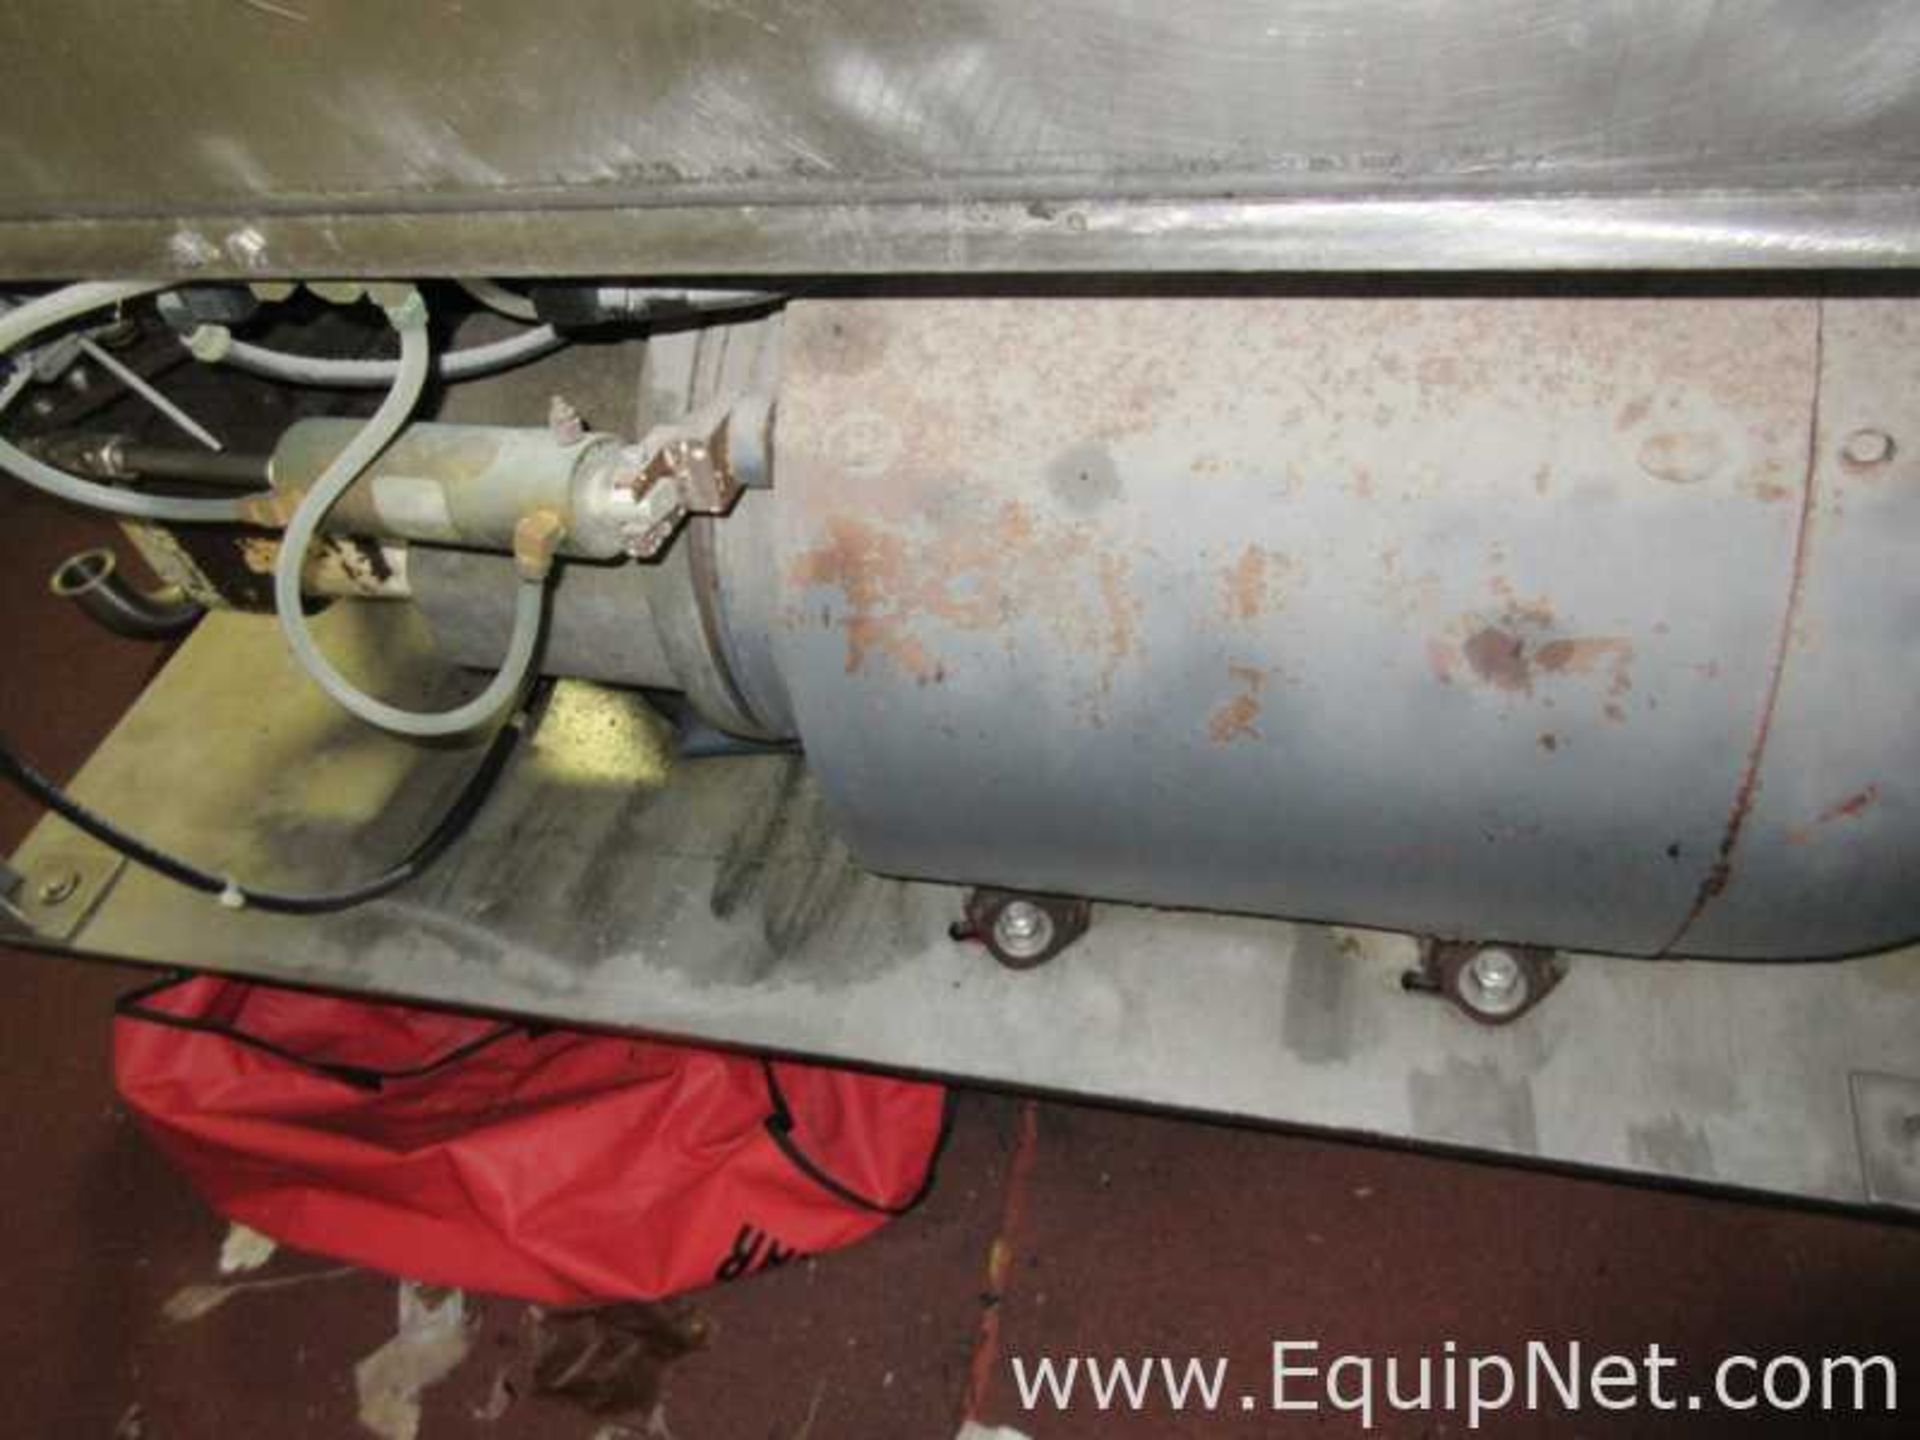 EQUIPNET LISTING #775954; REMOVAL COST: $1,828.00; DESCRIPTION: Approx. 300 Gallon Stainless Steel - Image 10 of 15